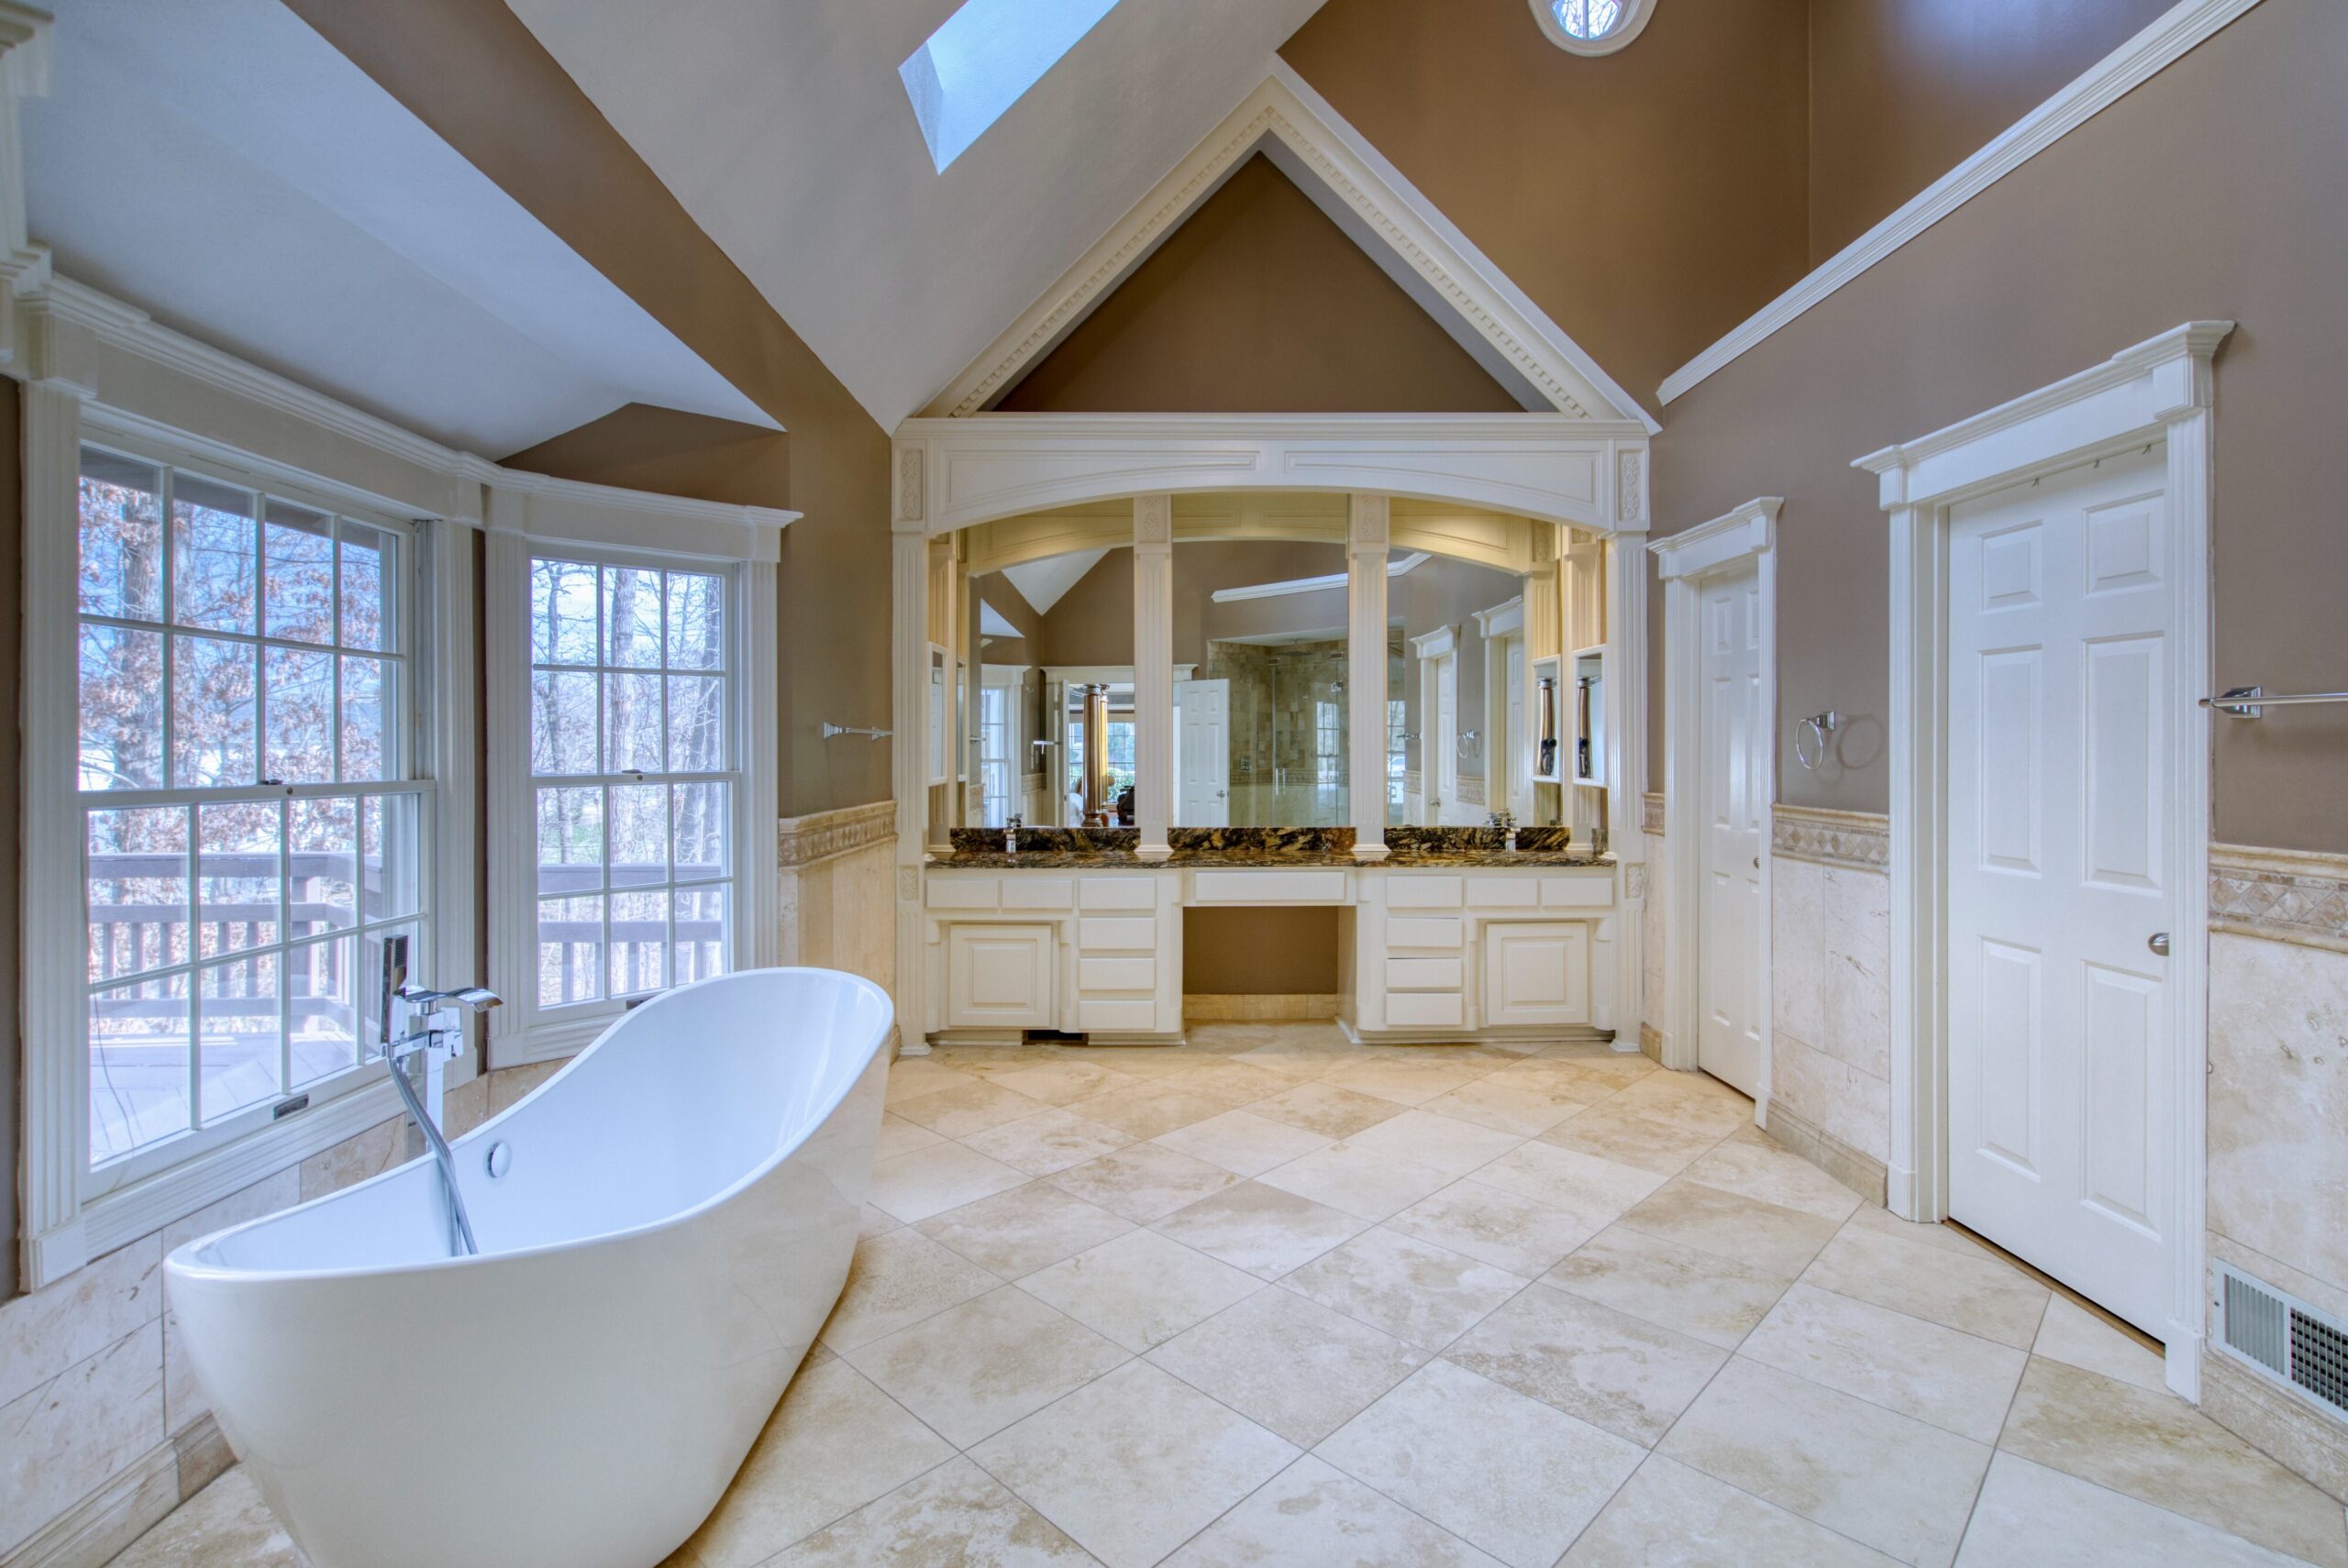 Interior professional photo of 21024 Starflower Way in Ashburn, VA - showing the primary bathroom with vaulted ceiling, skylights, soaking tub, and imported tilework